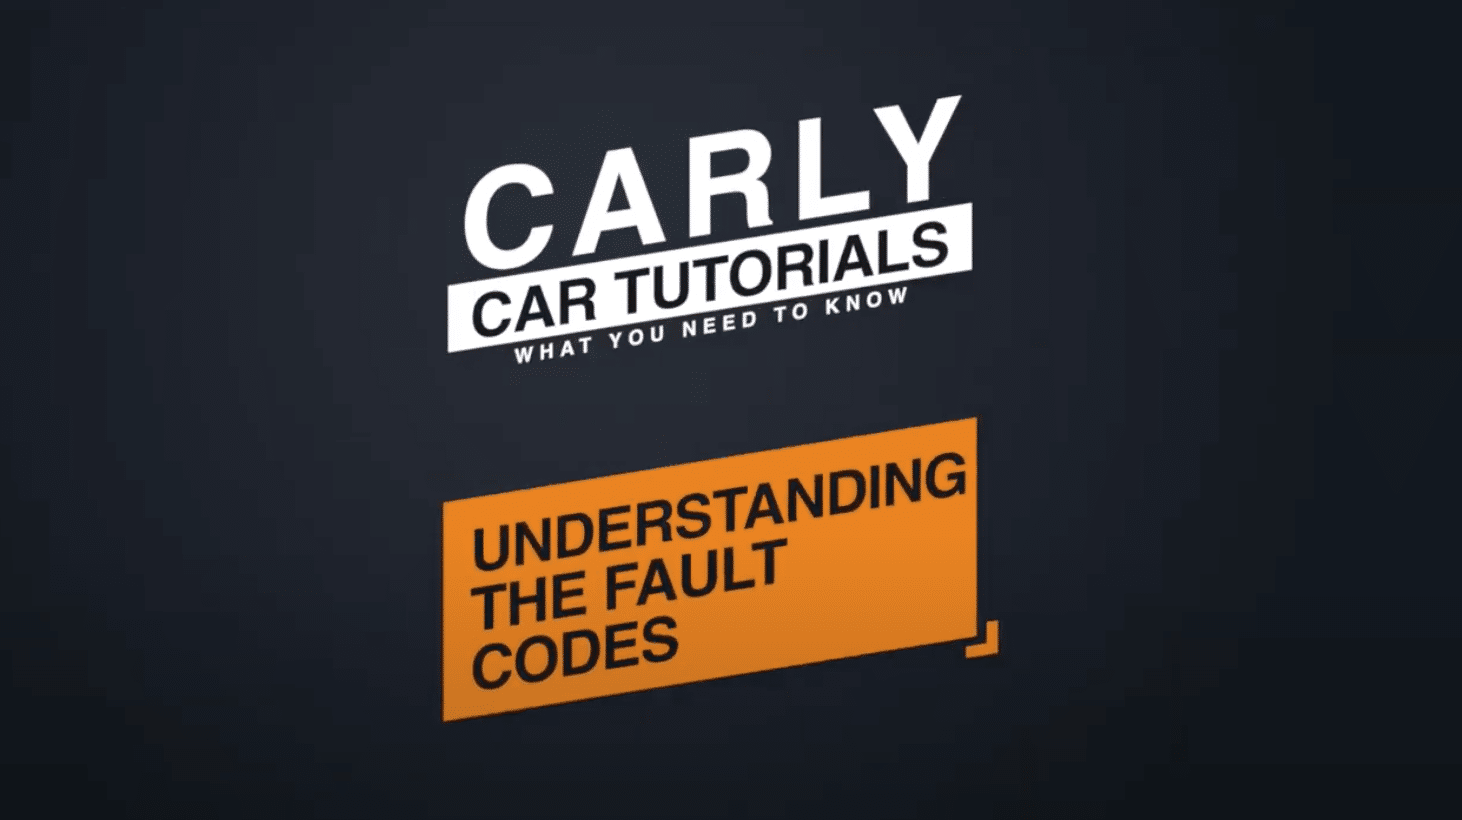 How to Understand the Fault Codes with Carly